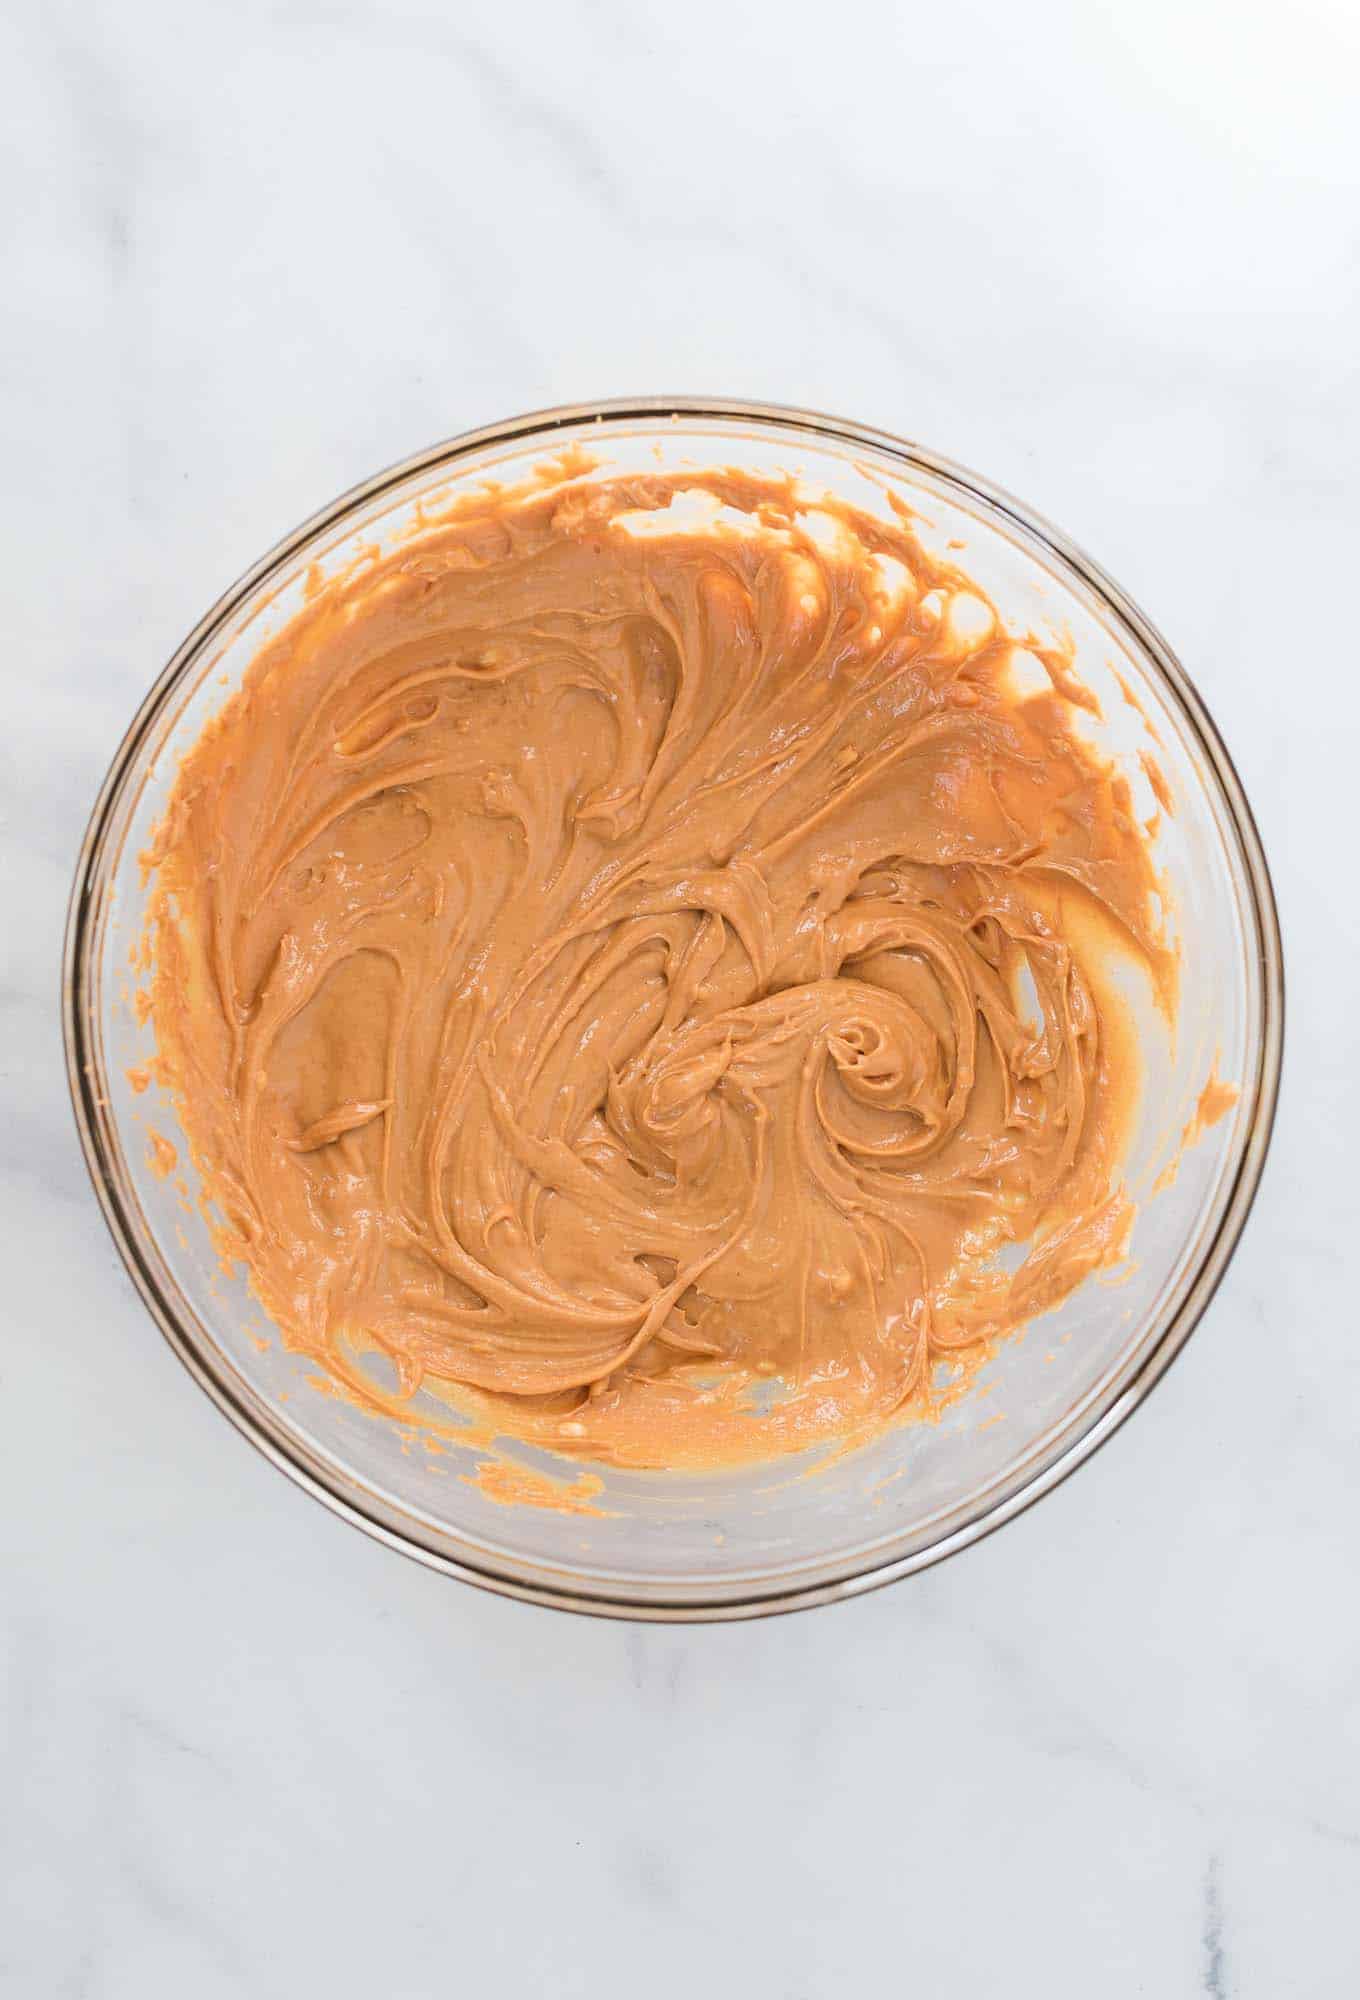 whipped peanut butter in a glass mixing bowl